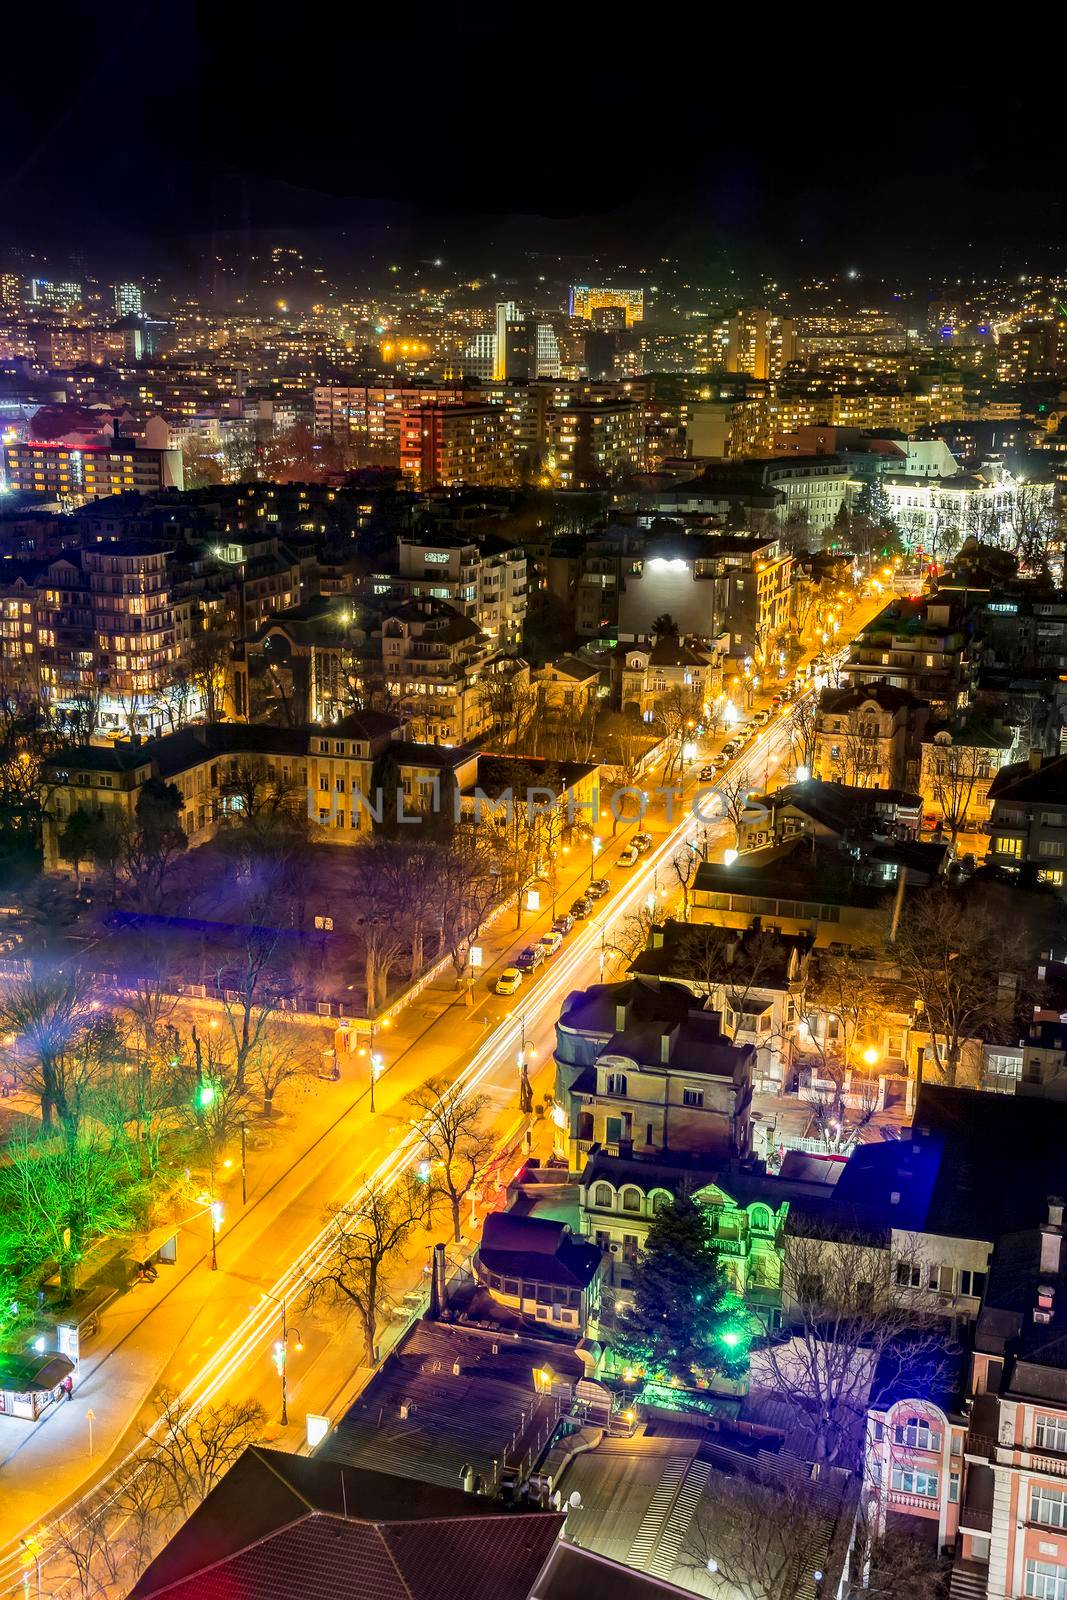 City at night by EdVal